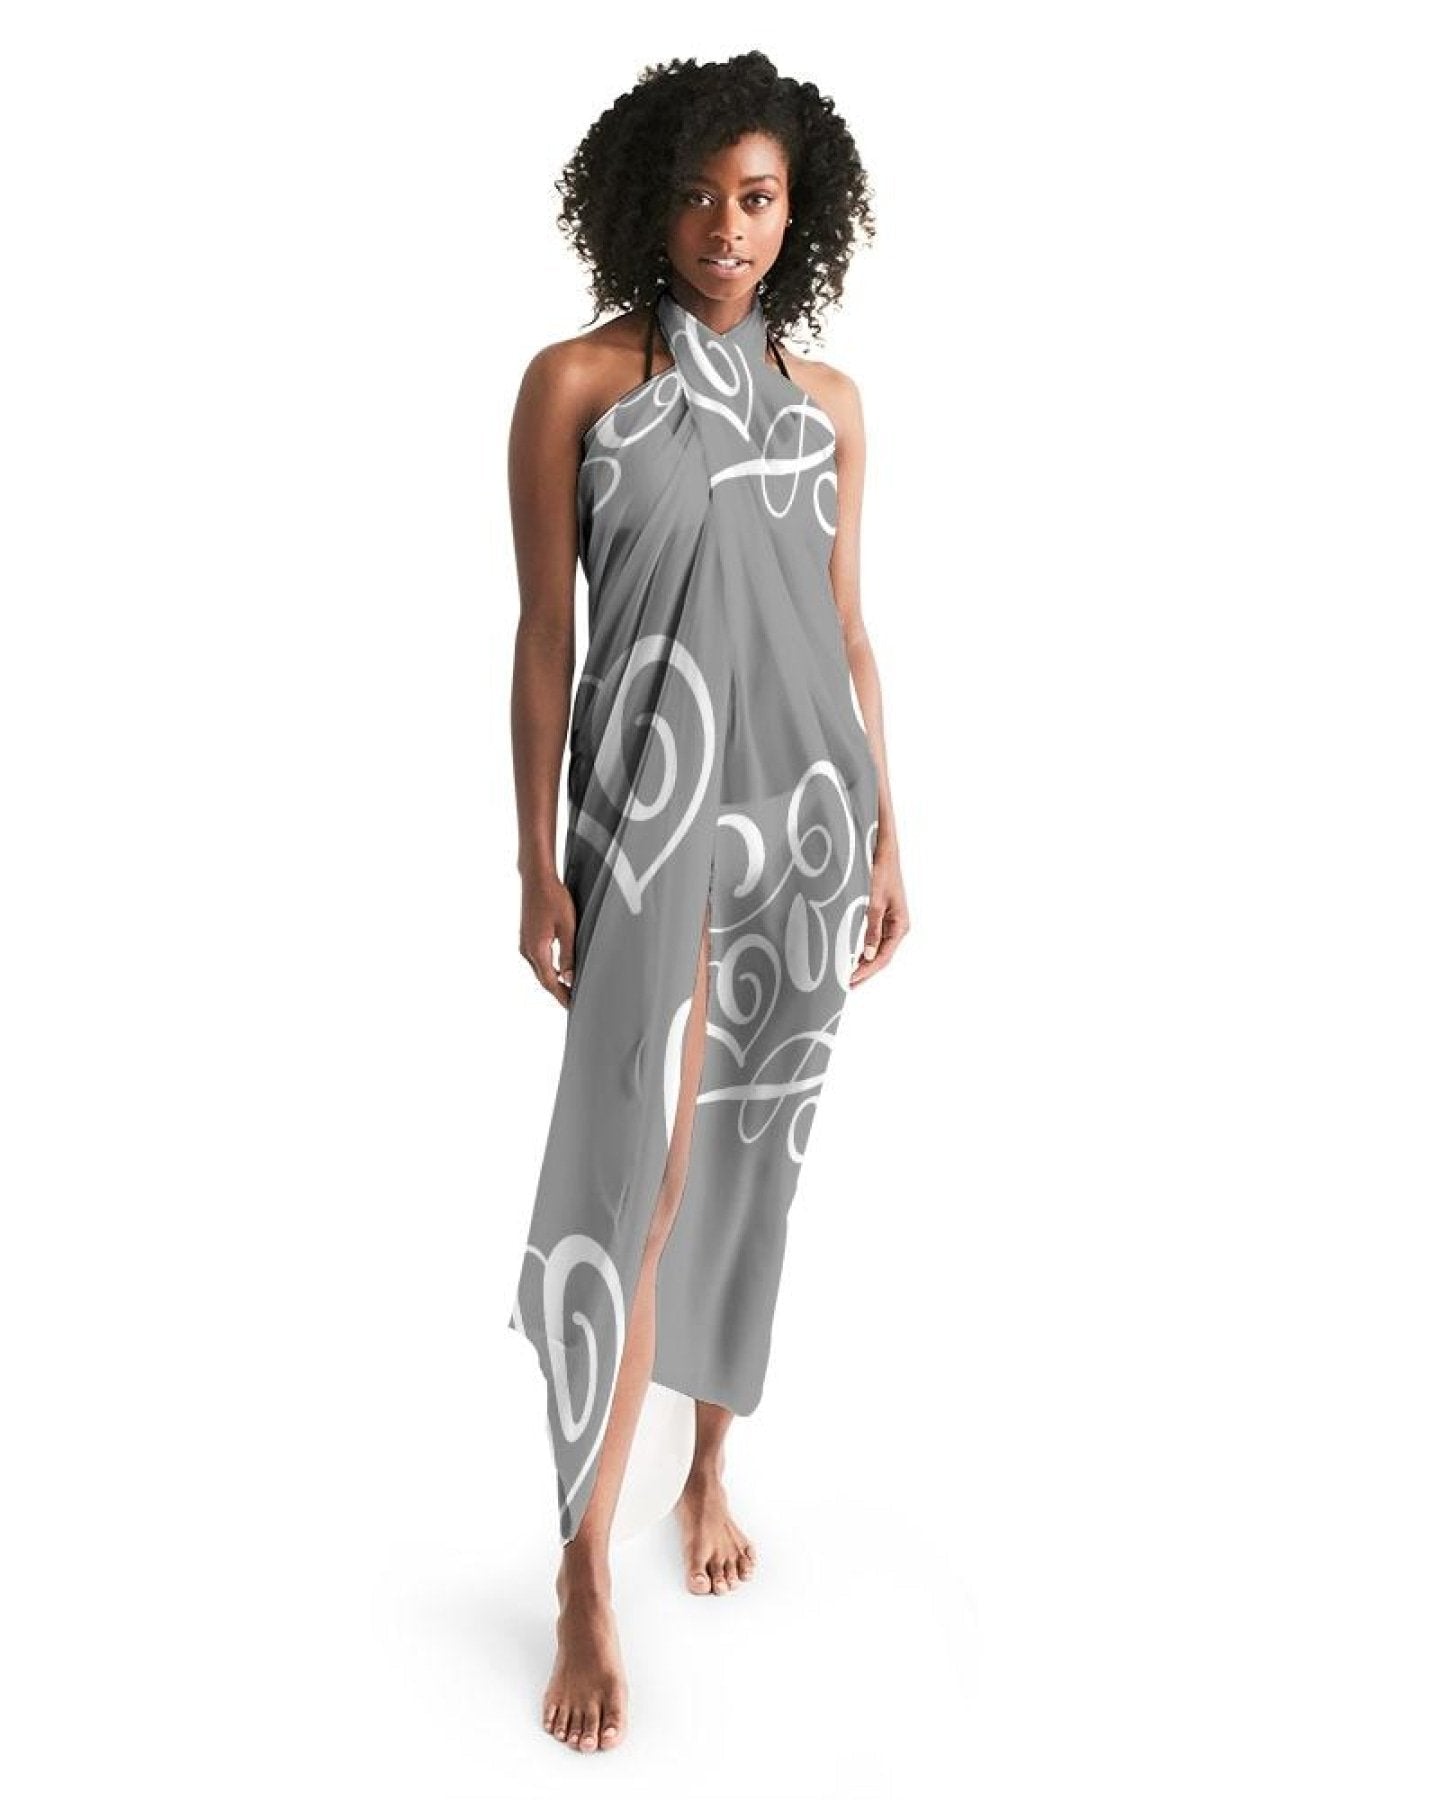 Buy Sheer Sarong Swimsuit Cover Up Wrap / Love Grey by inQue.Style